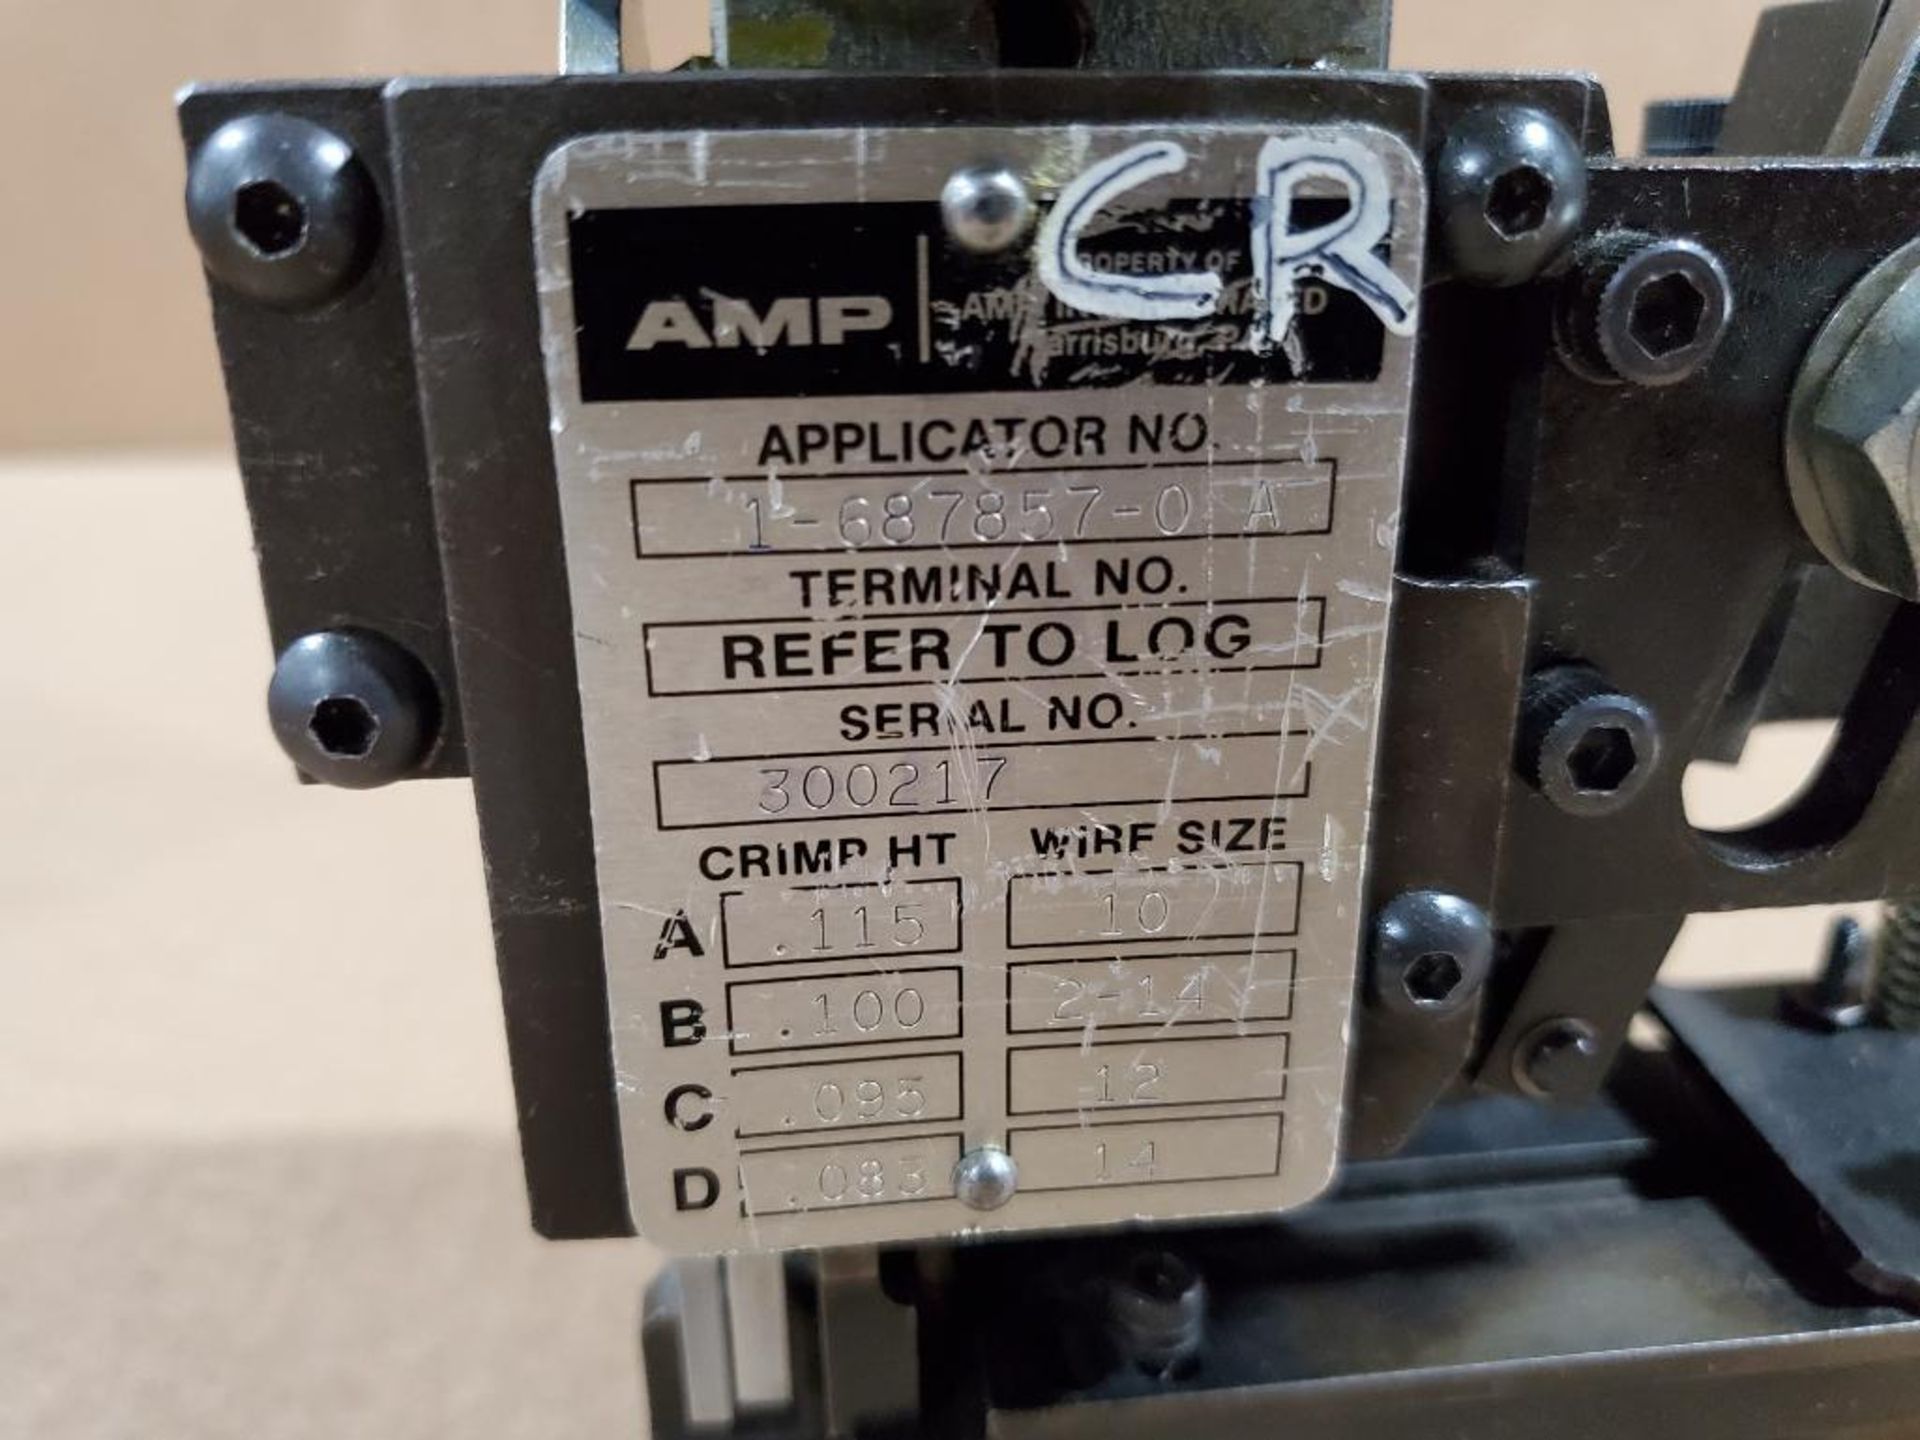 Amp wire terminal applicator. Number 1-687857-0-A. - Image 4 of 8